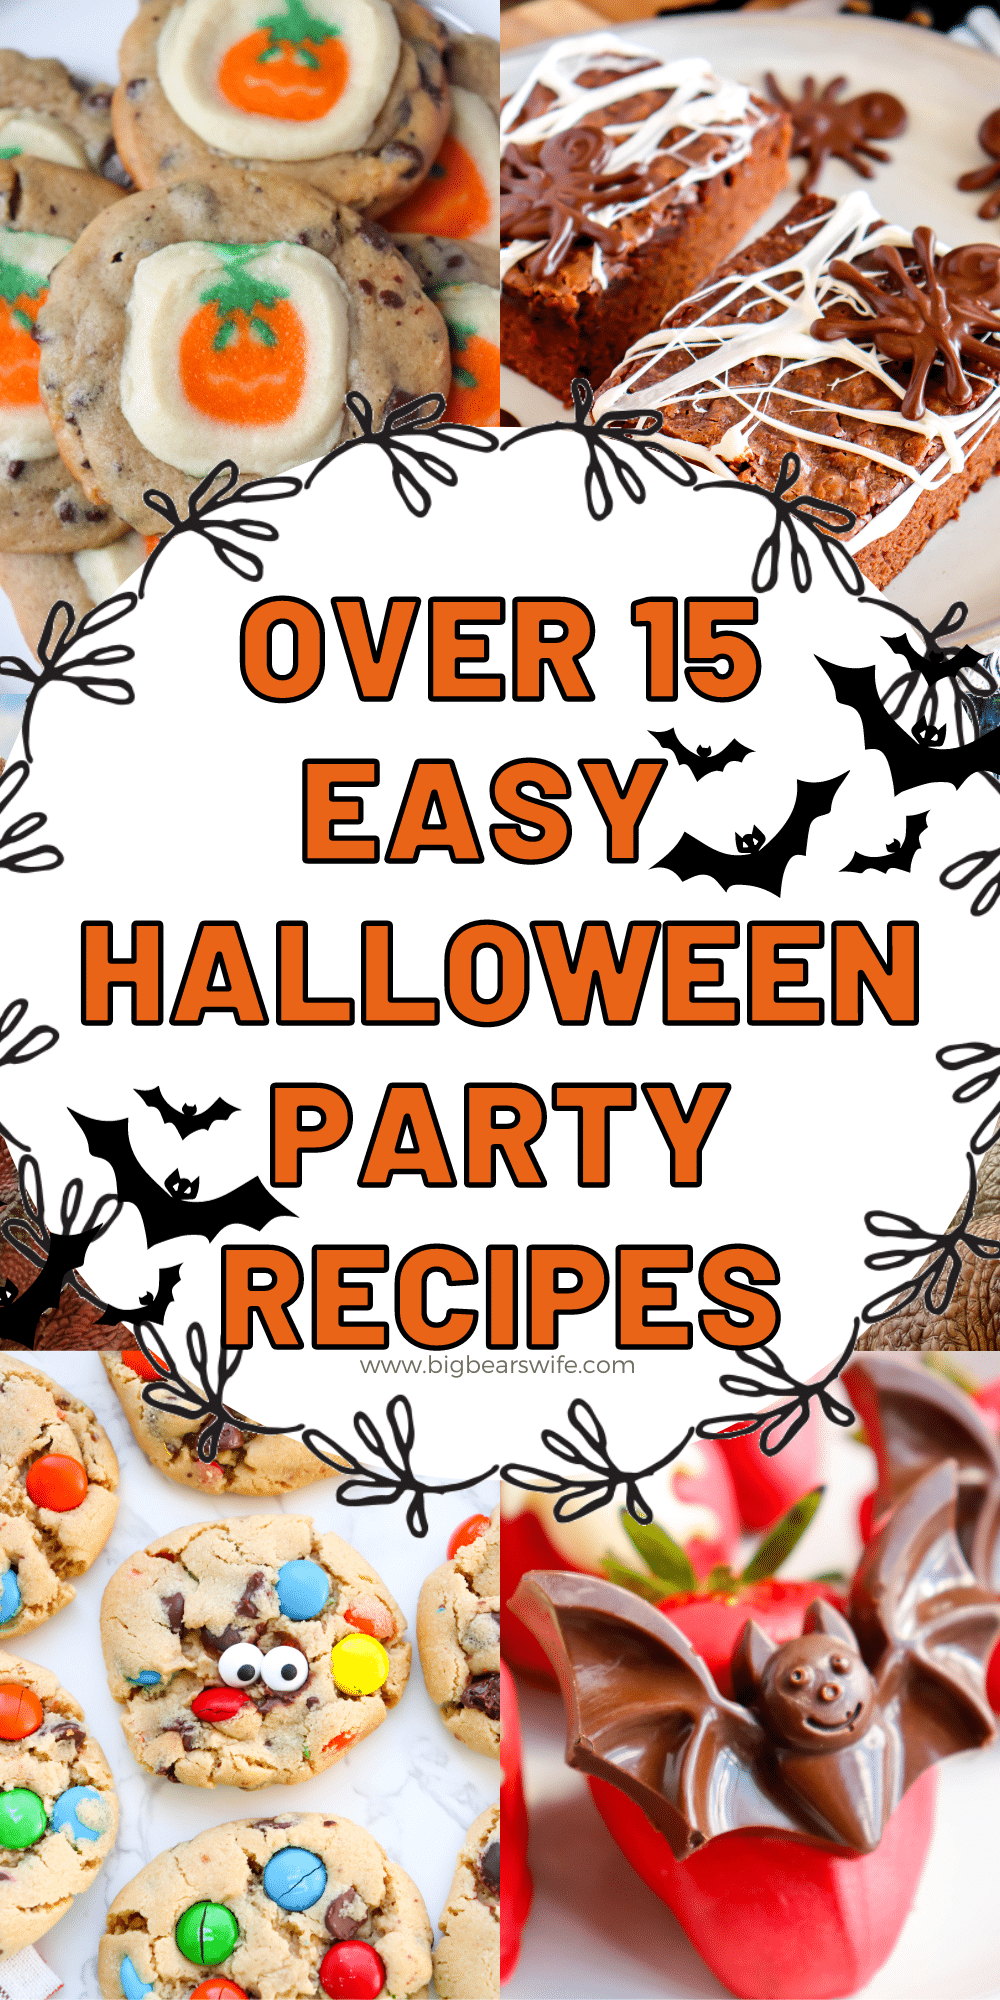 Halloween parties are so fun! They're even more exciting when you've got lots of wonderful Halloween Party Recipes to add to the dinner and dessert table!  via @bigbearswife